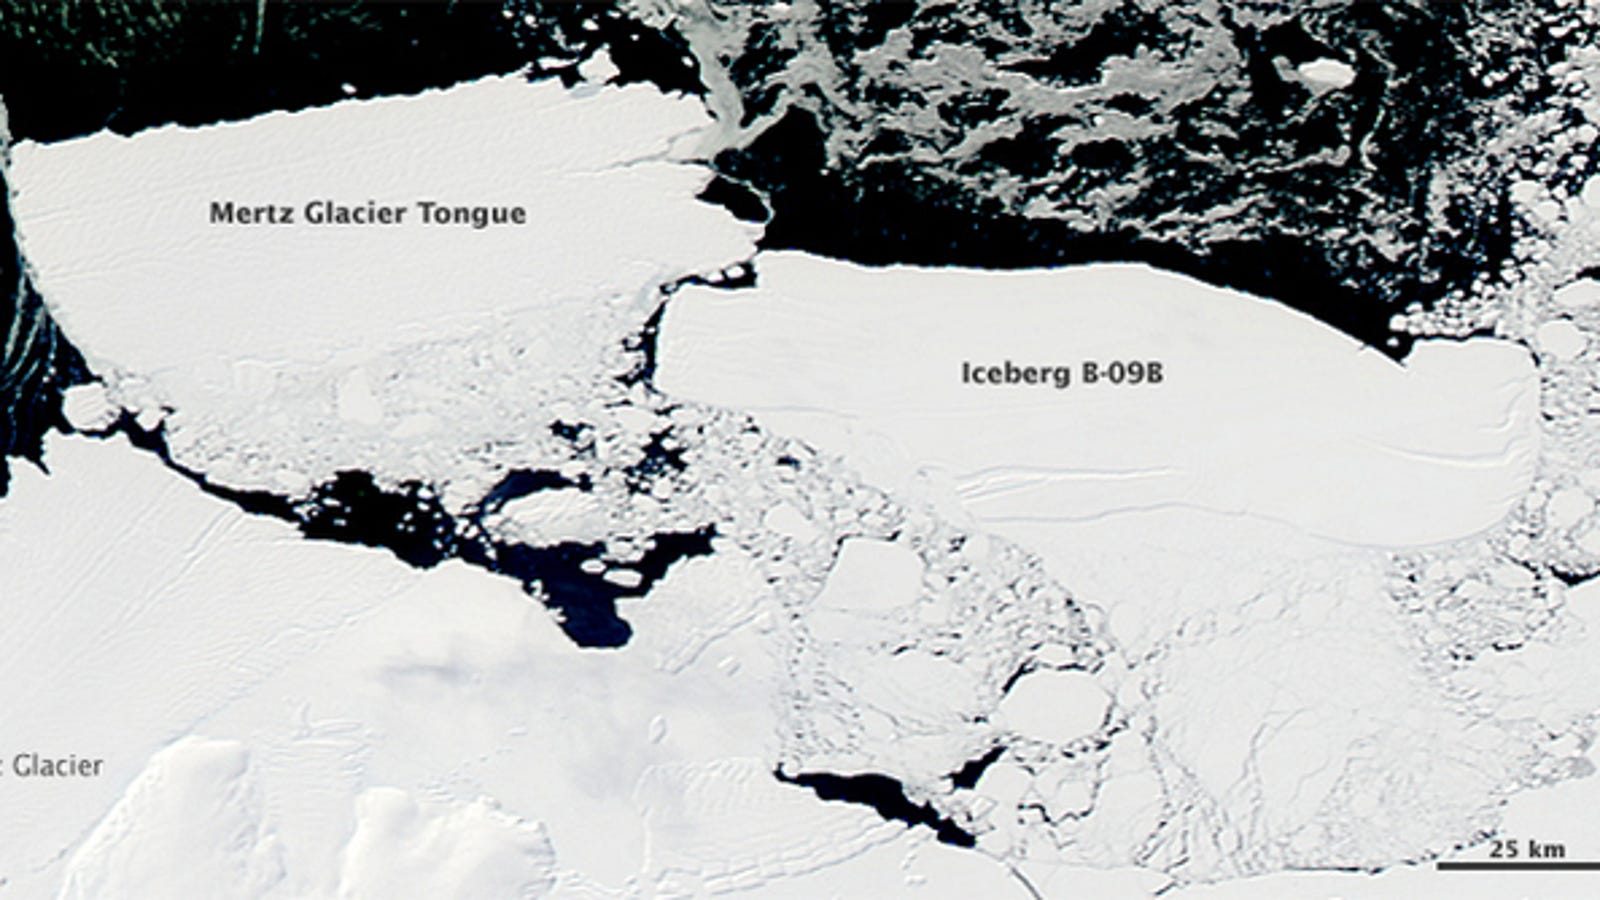 When an Iceberg the Size of a Country Breaks Free, What Happens?